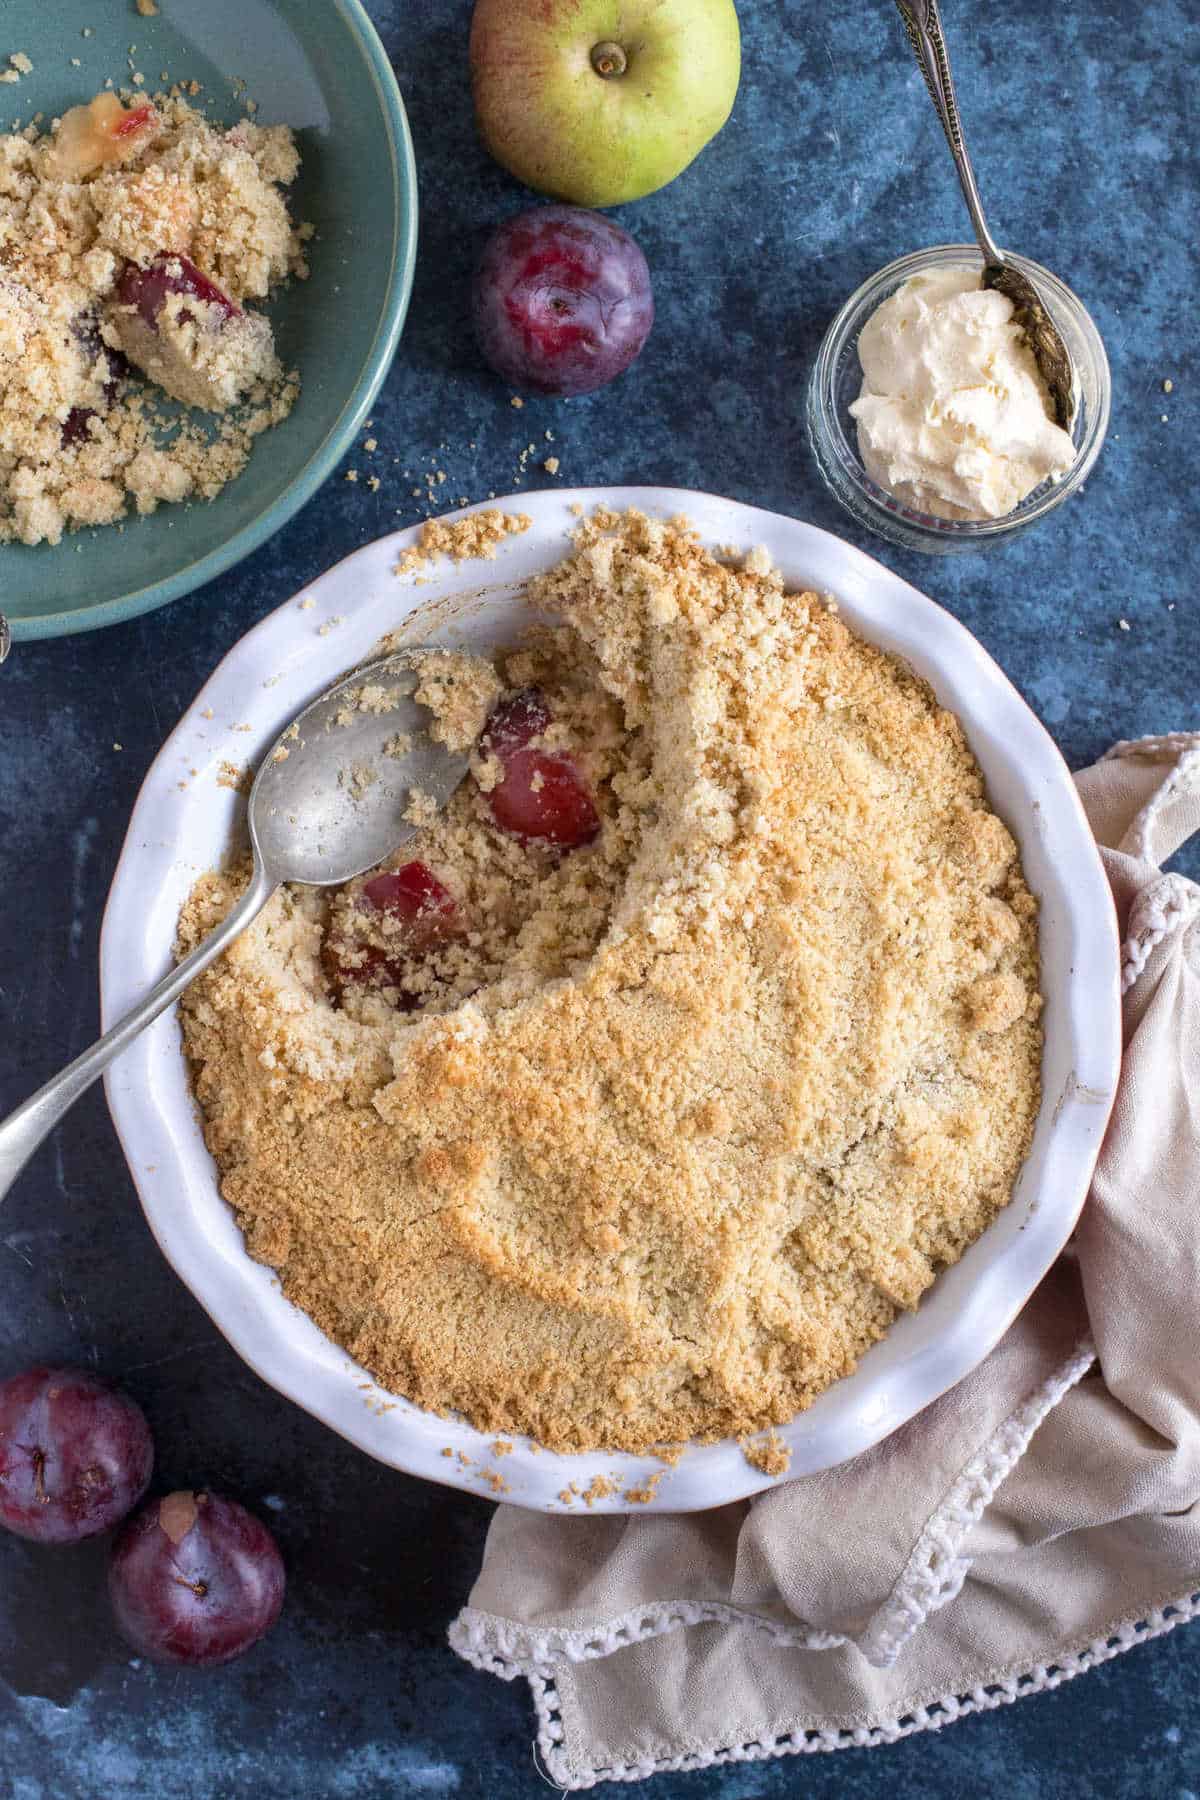 Plum and apple crumble in a red pie dish.